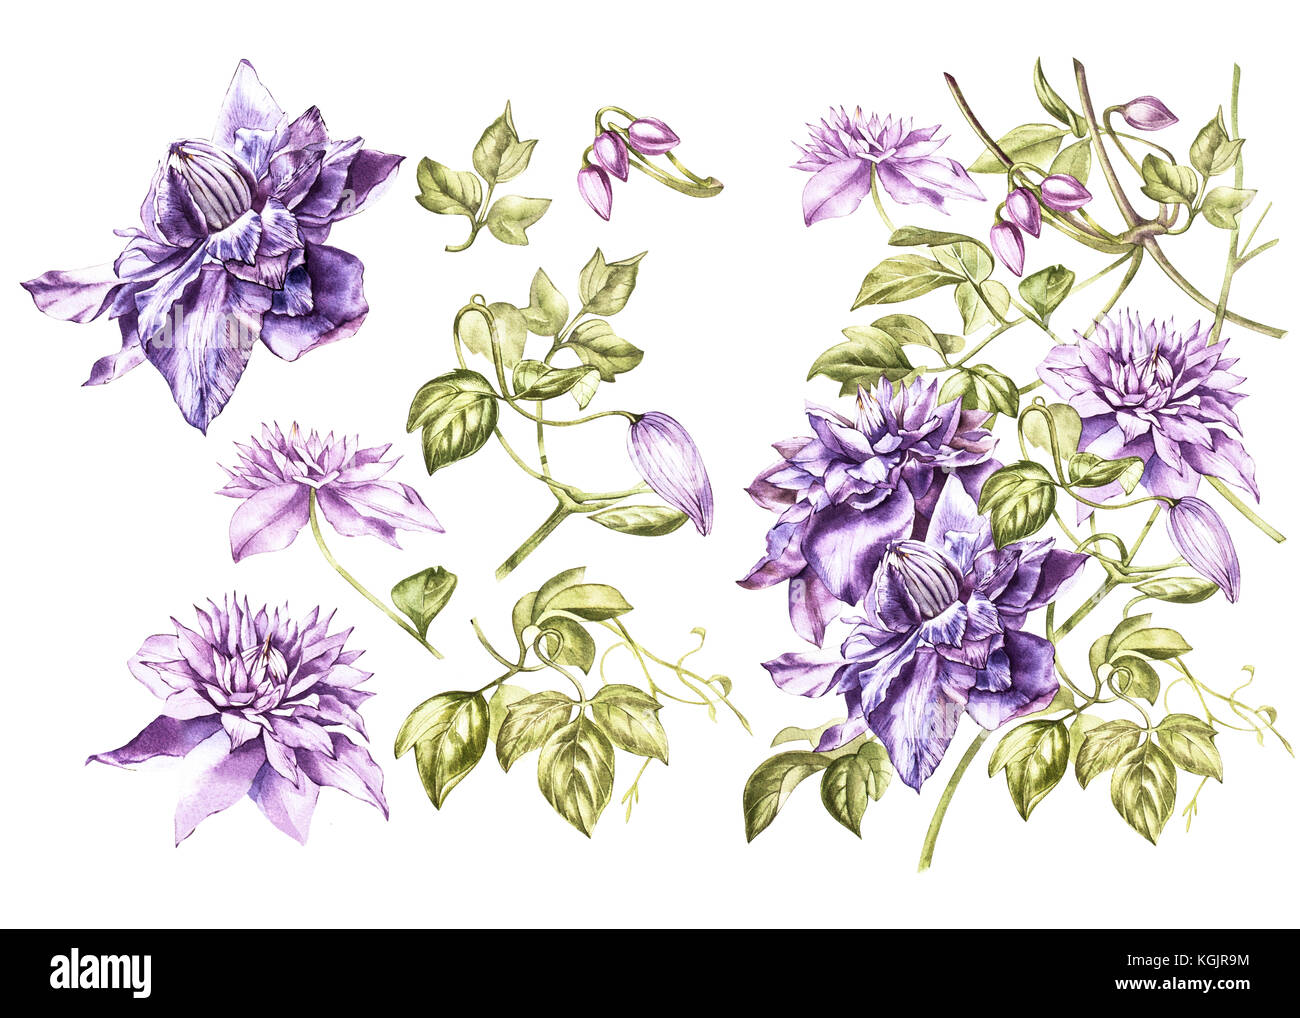 Set Illustration in watercolor of a clematis flower blossom. Floral card with flowers. Botanical illustration. Stock Photo